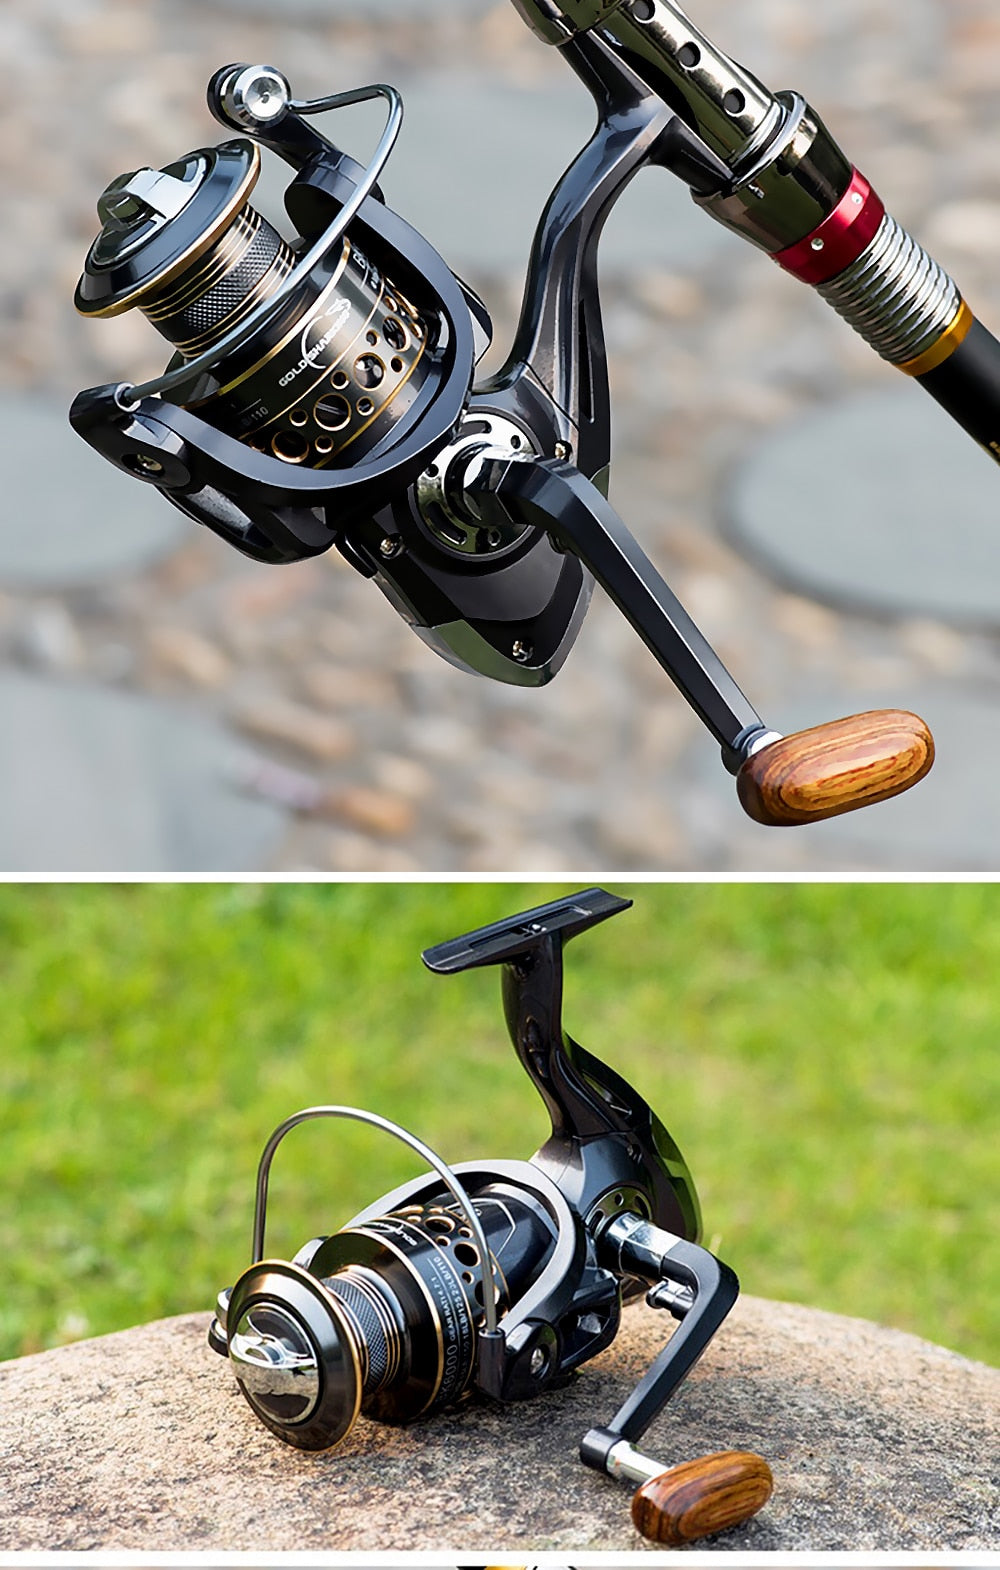 Setup A Spinning Reelversatile Carbon Fishing Rod & Reel Combo - 1.8-3.6m  Telescopic For All Fishing Environments